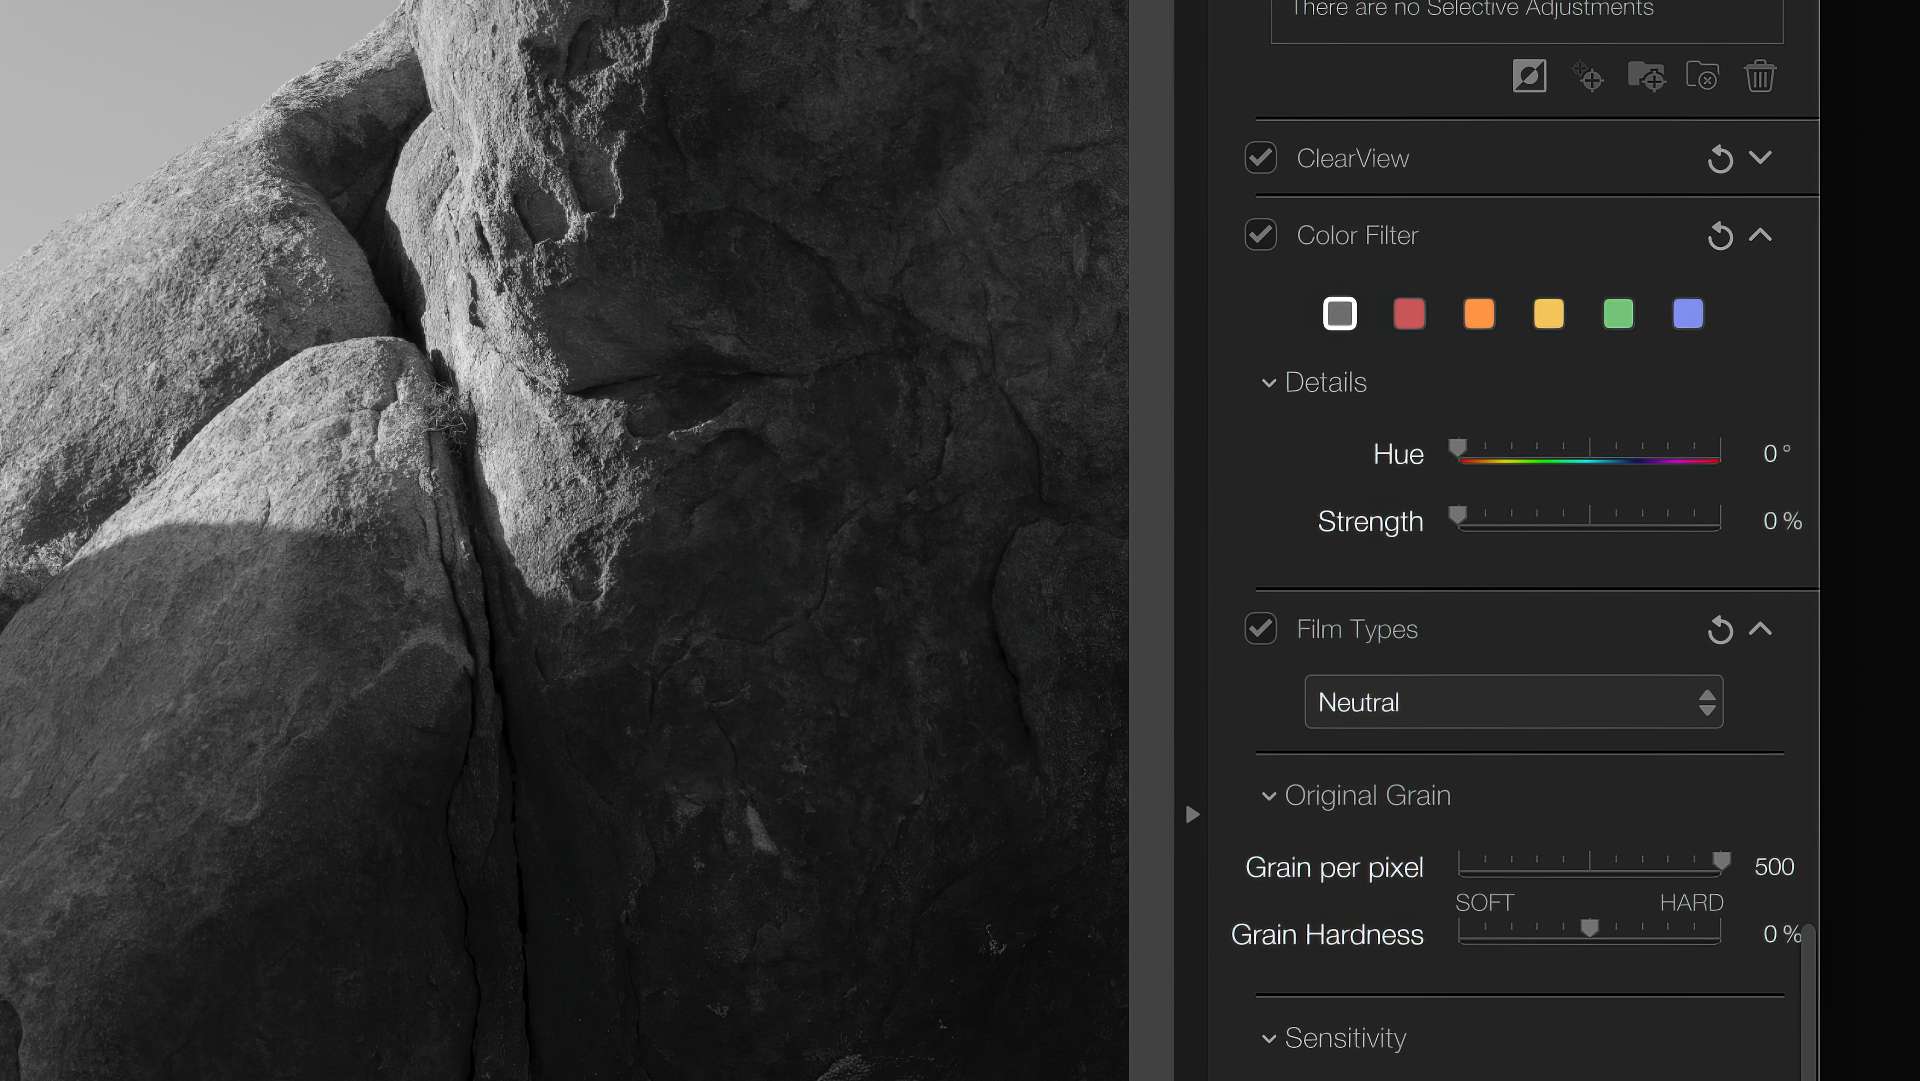 Color filter interface in Nik Silver Efex that emulates real-world filters